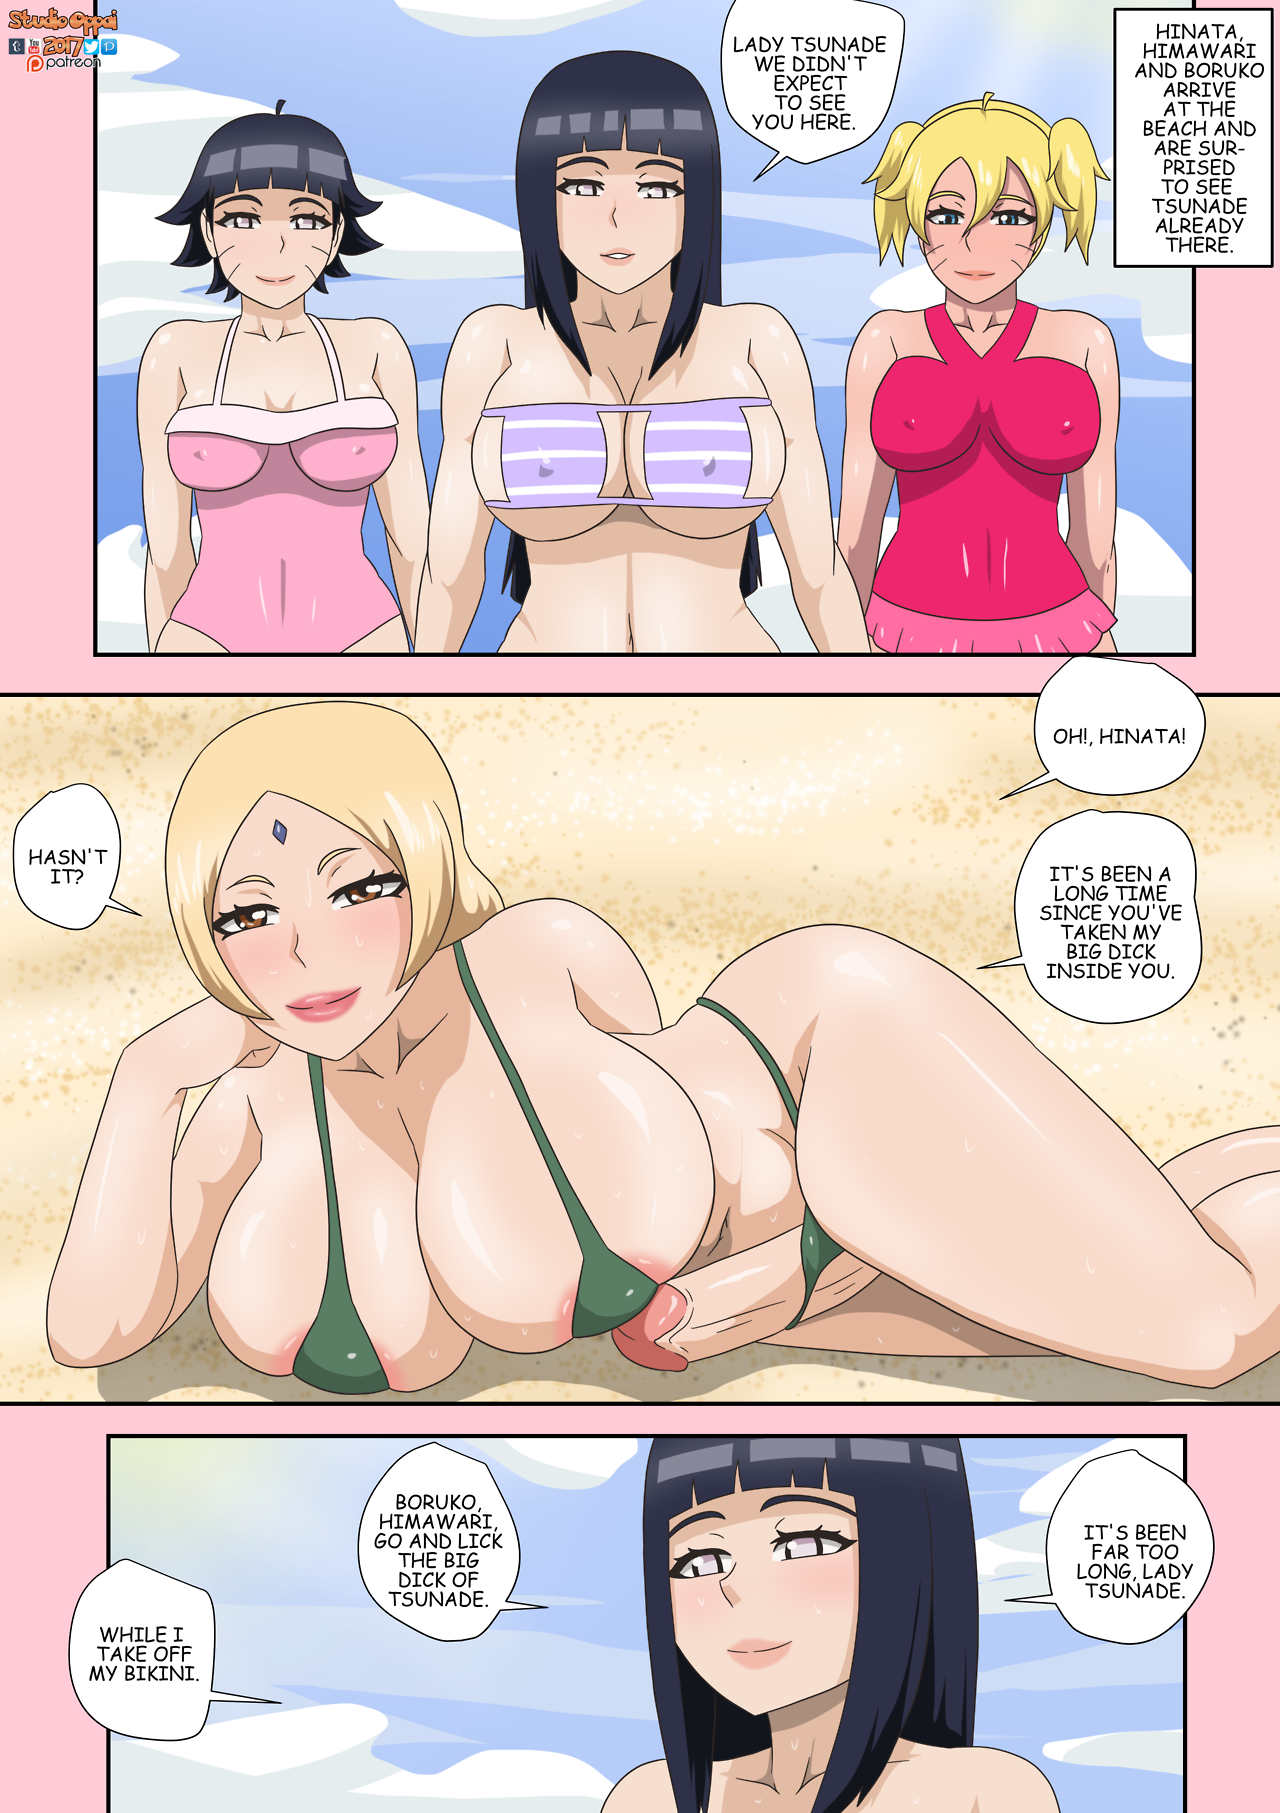 Updated from Studio Oppai A Beautiful Day at the Beach 7 pages Hentai Comic